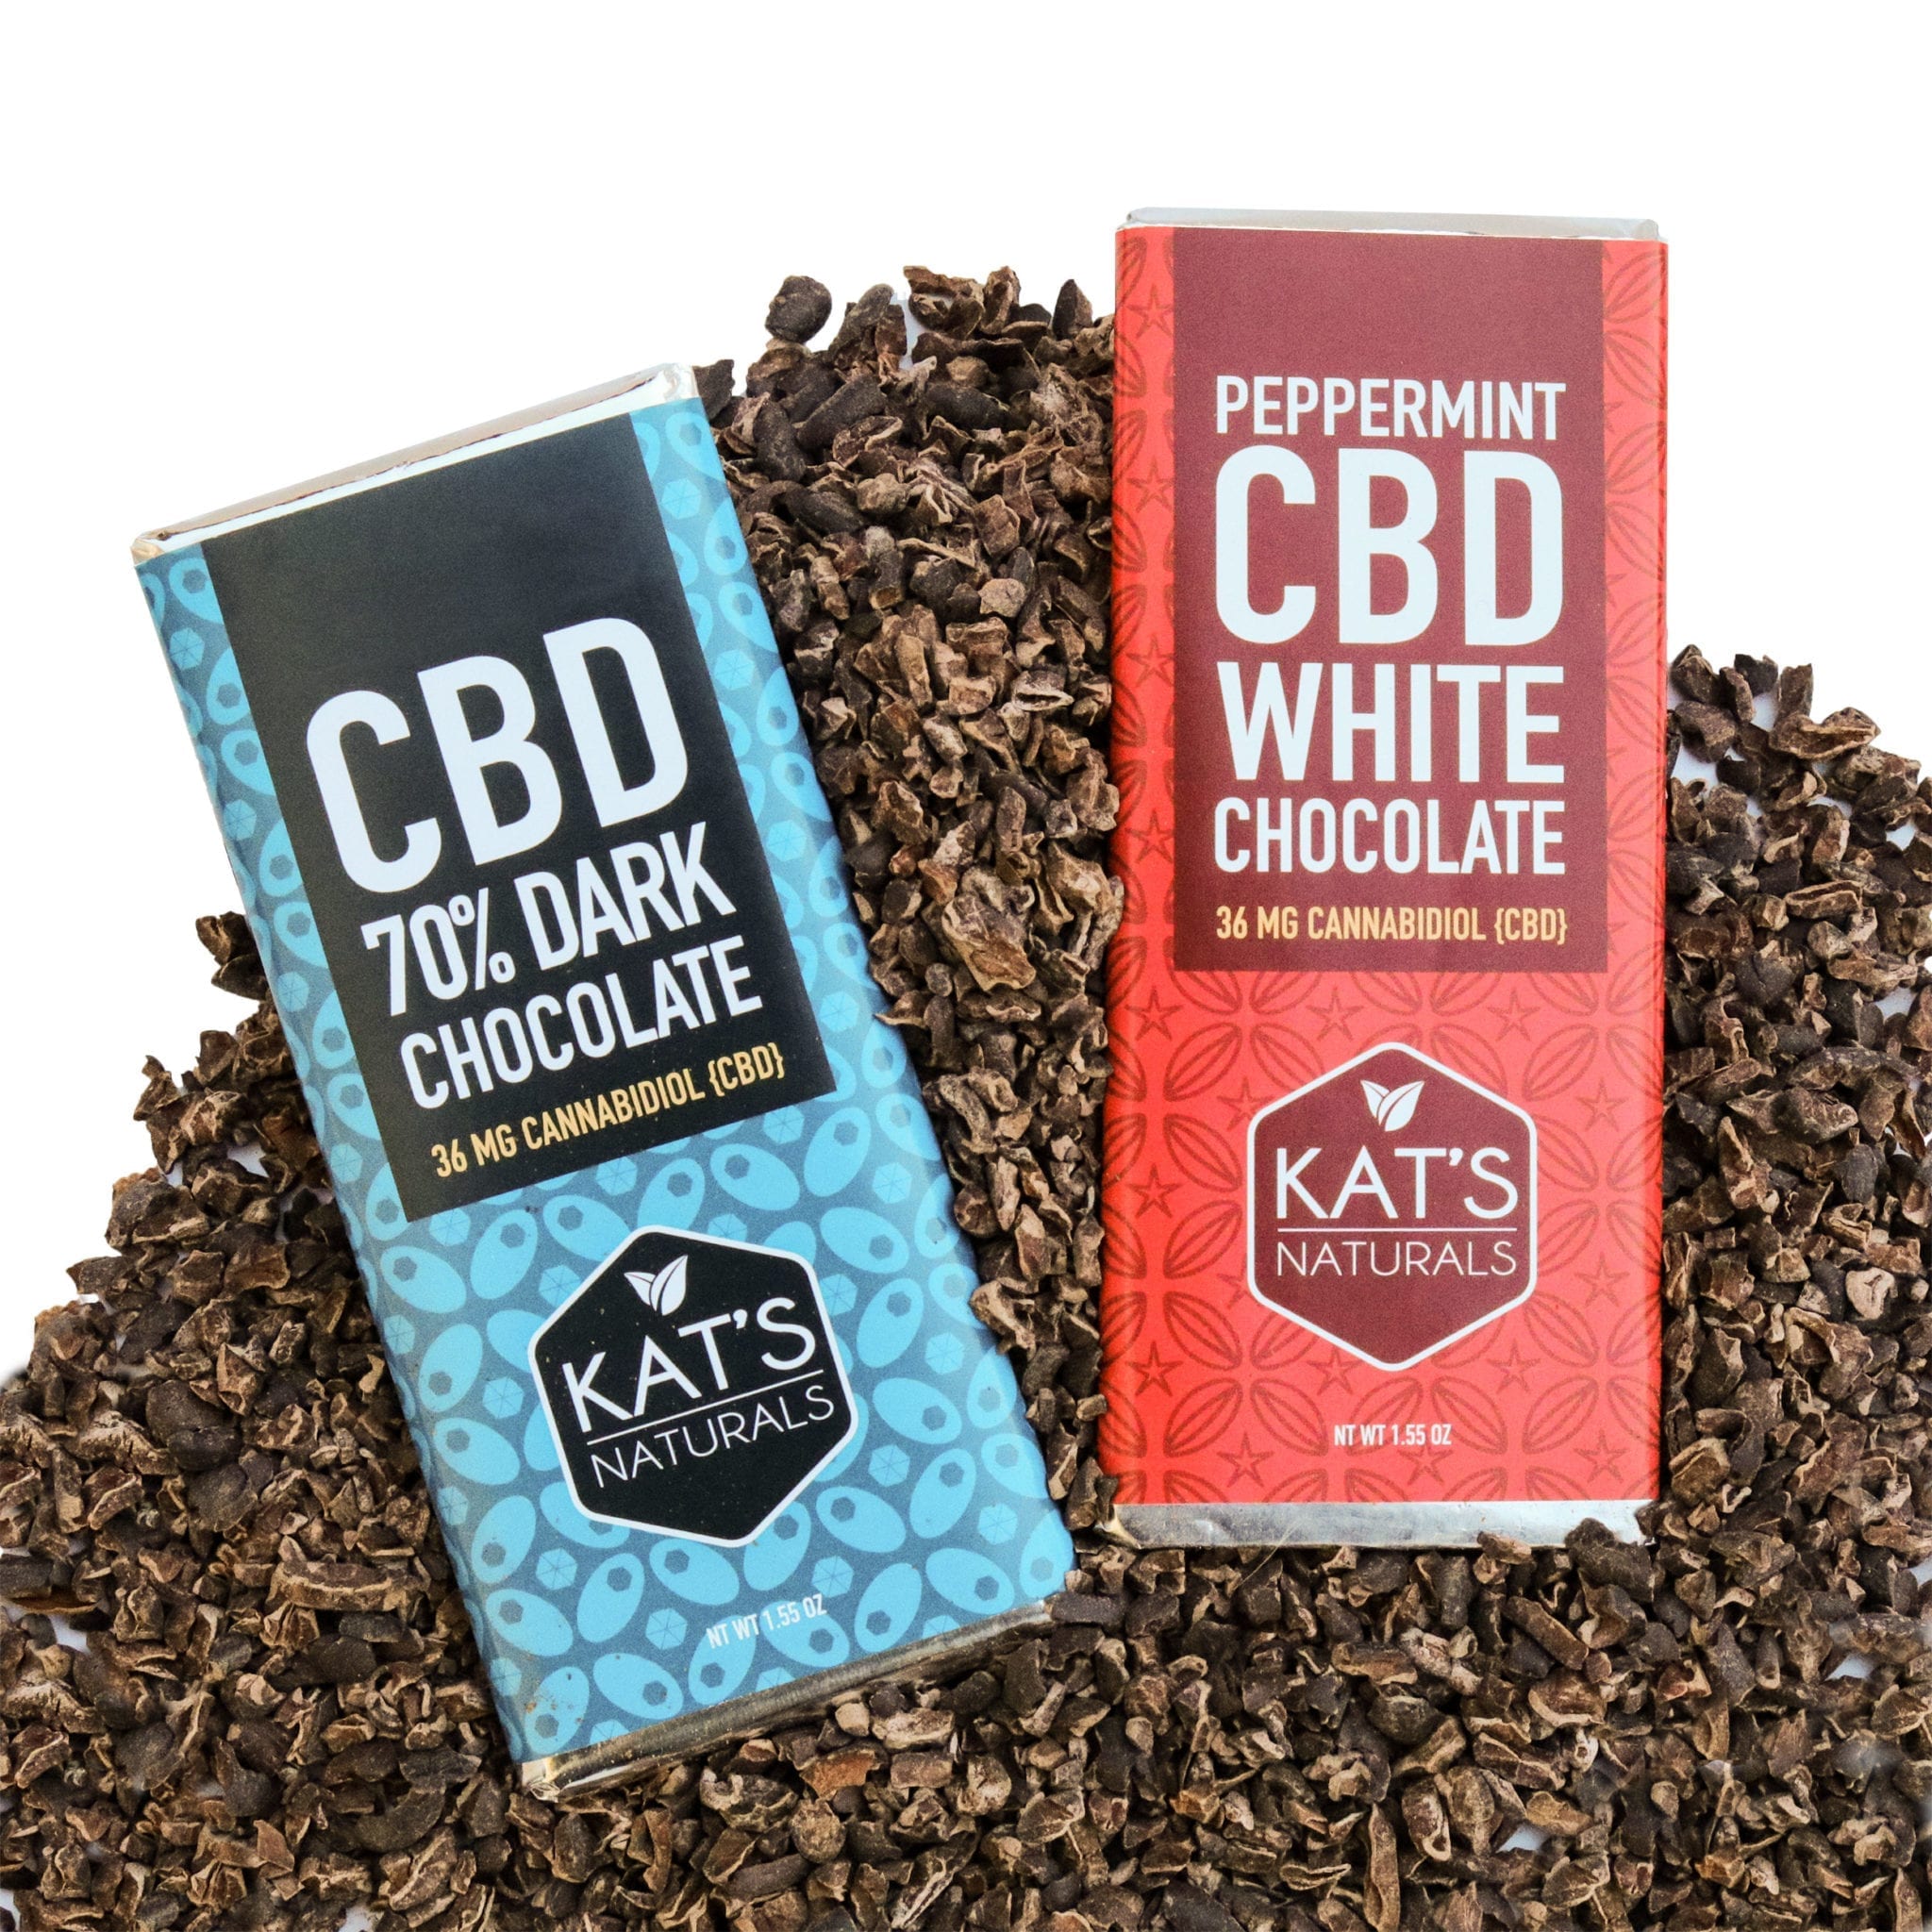 how long does CBD last in chocolate bars